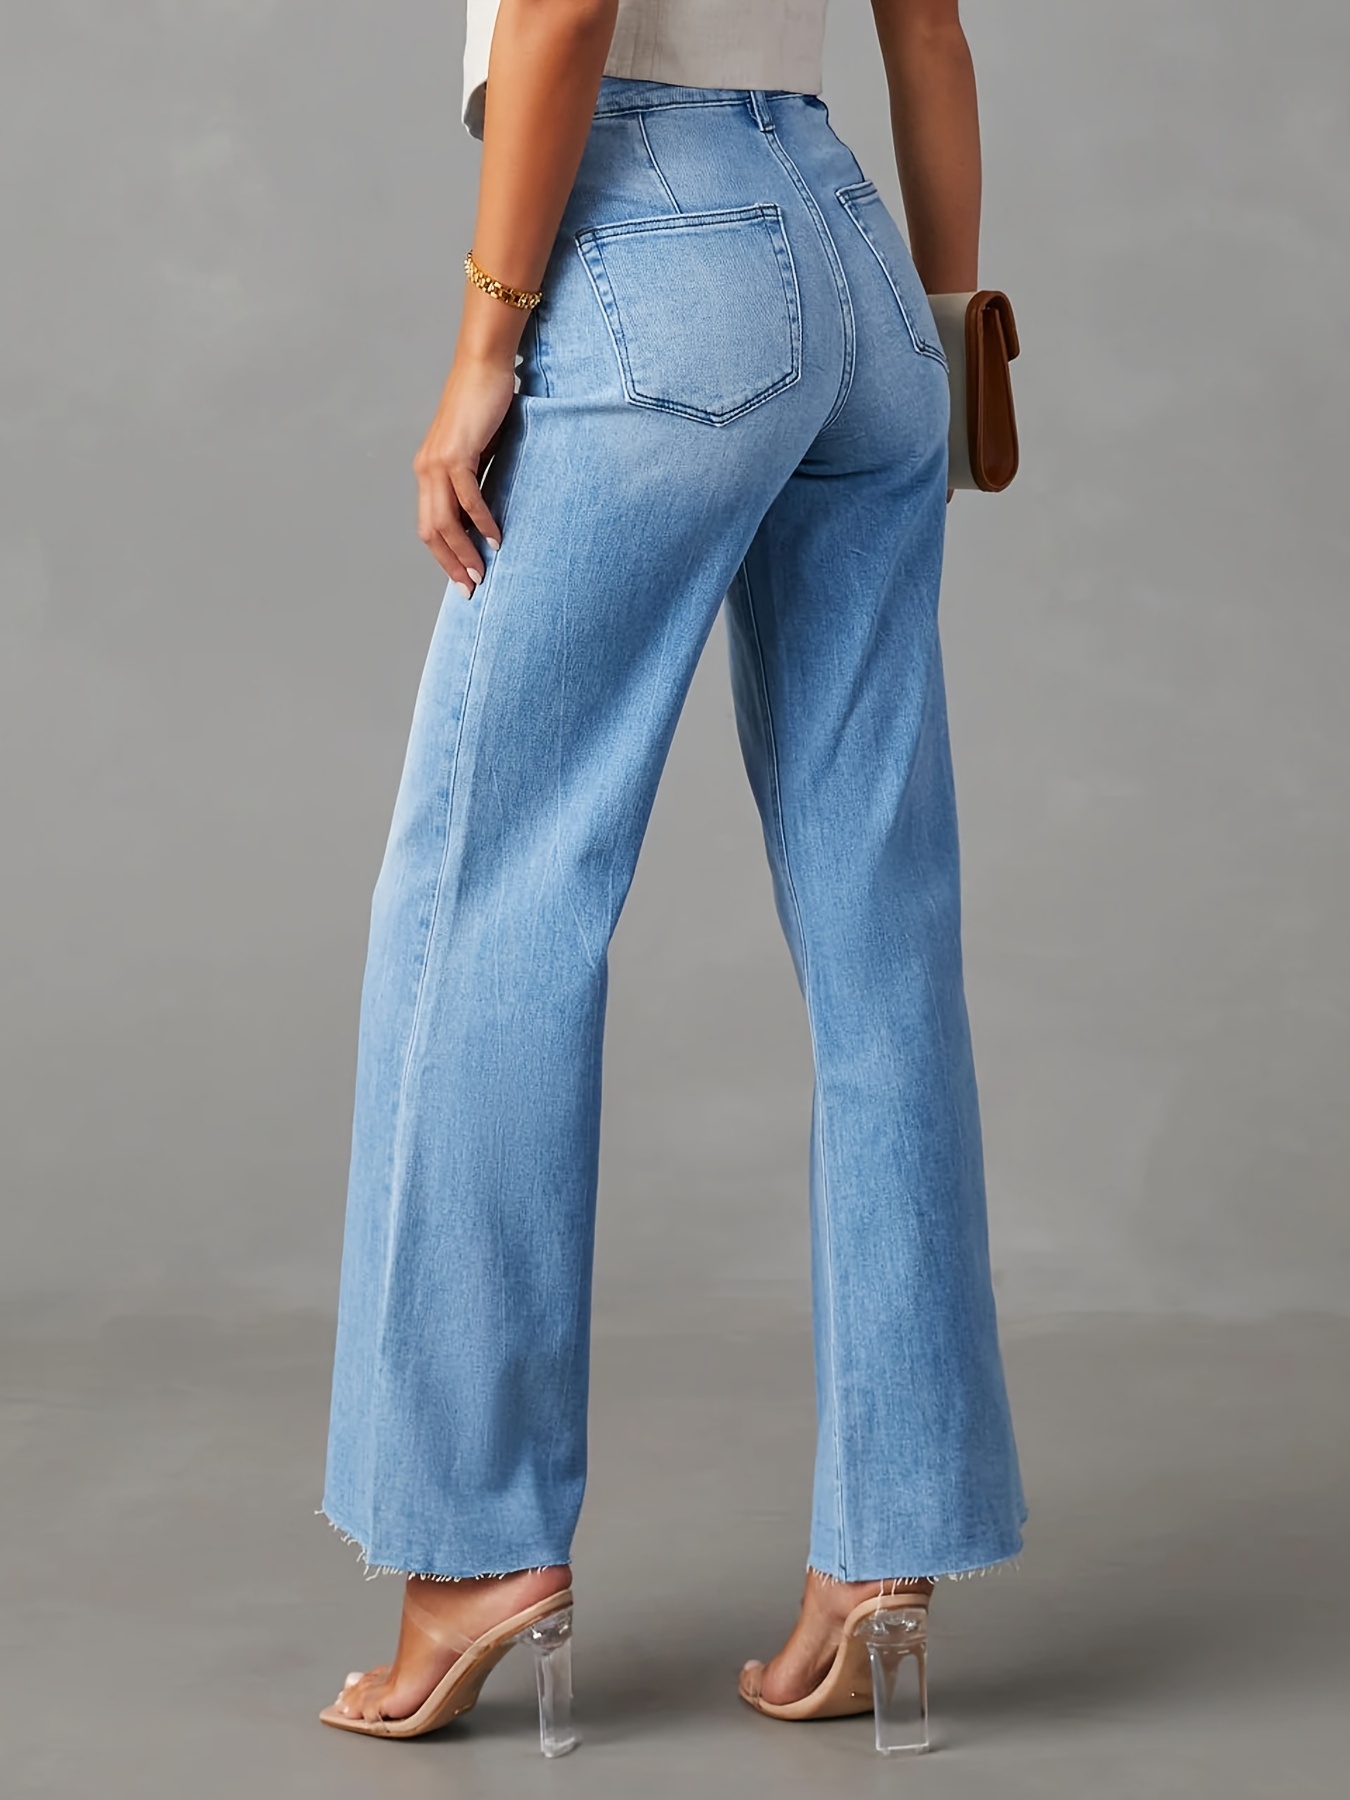 Blue High Waist Washed Baggy Jeans, Loose Fit Raw Cut Casual Wide Legs  Jeans, Women's Denim Jeans & Clothing